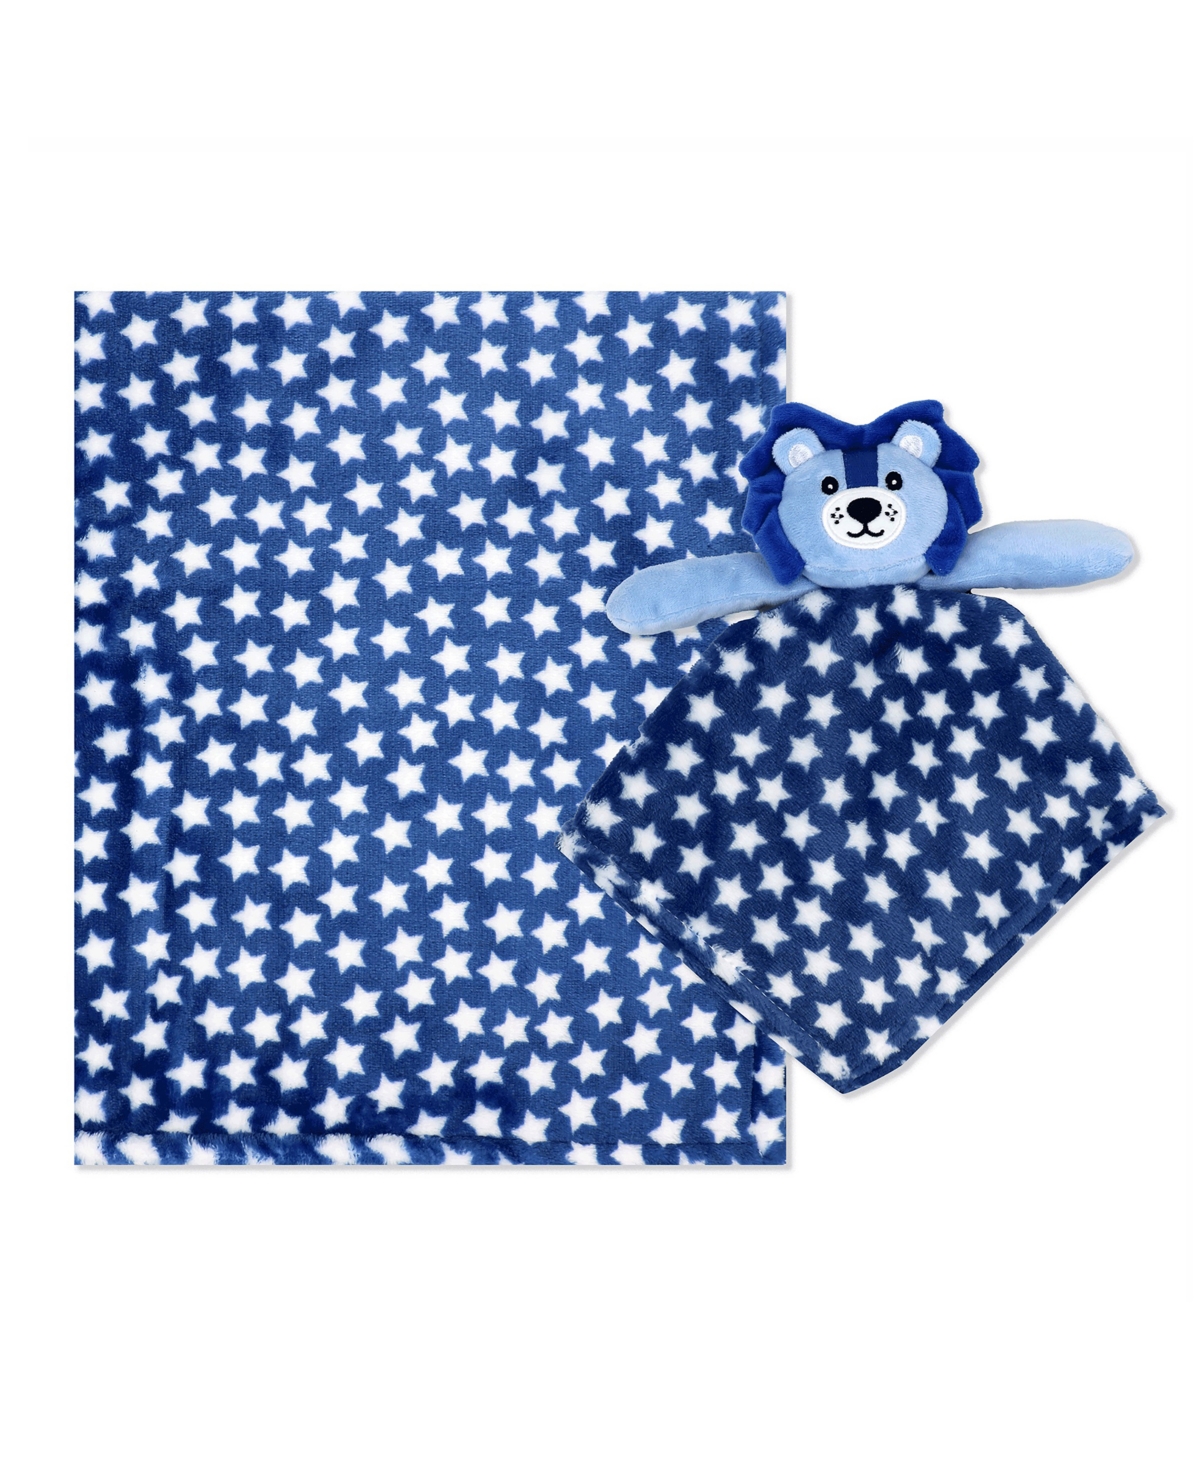 3 Stories Trading Baby Boys Blanket And Nunu, 2 Piece Set In Navy Stars